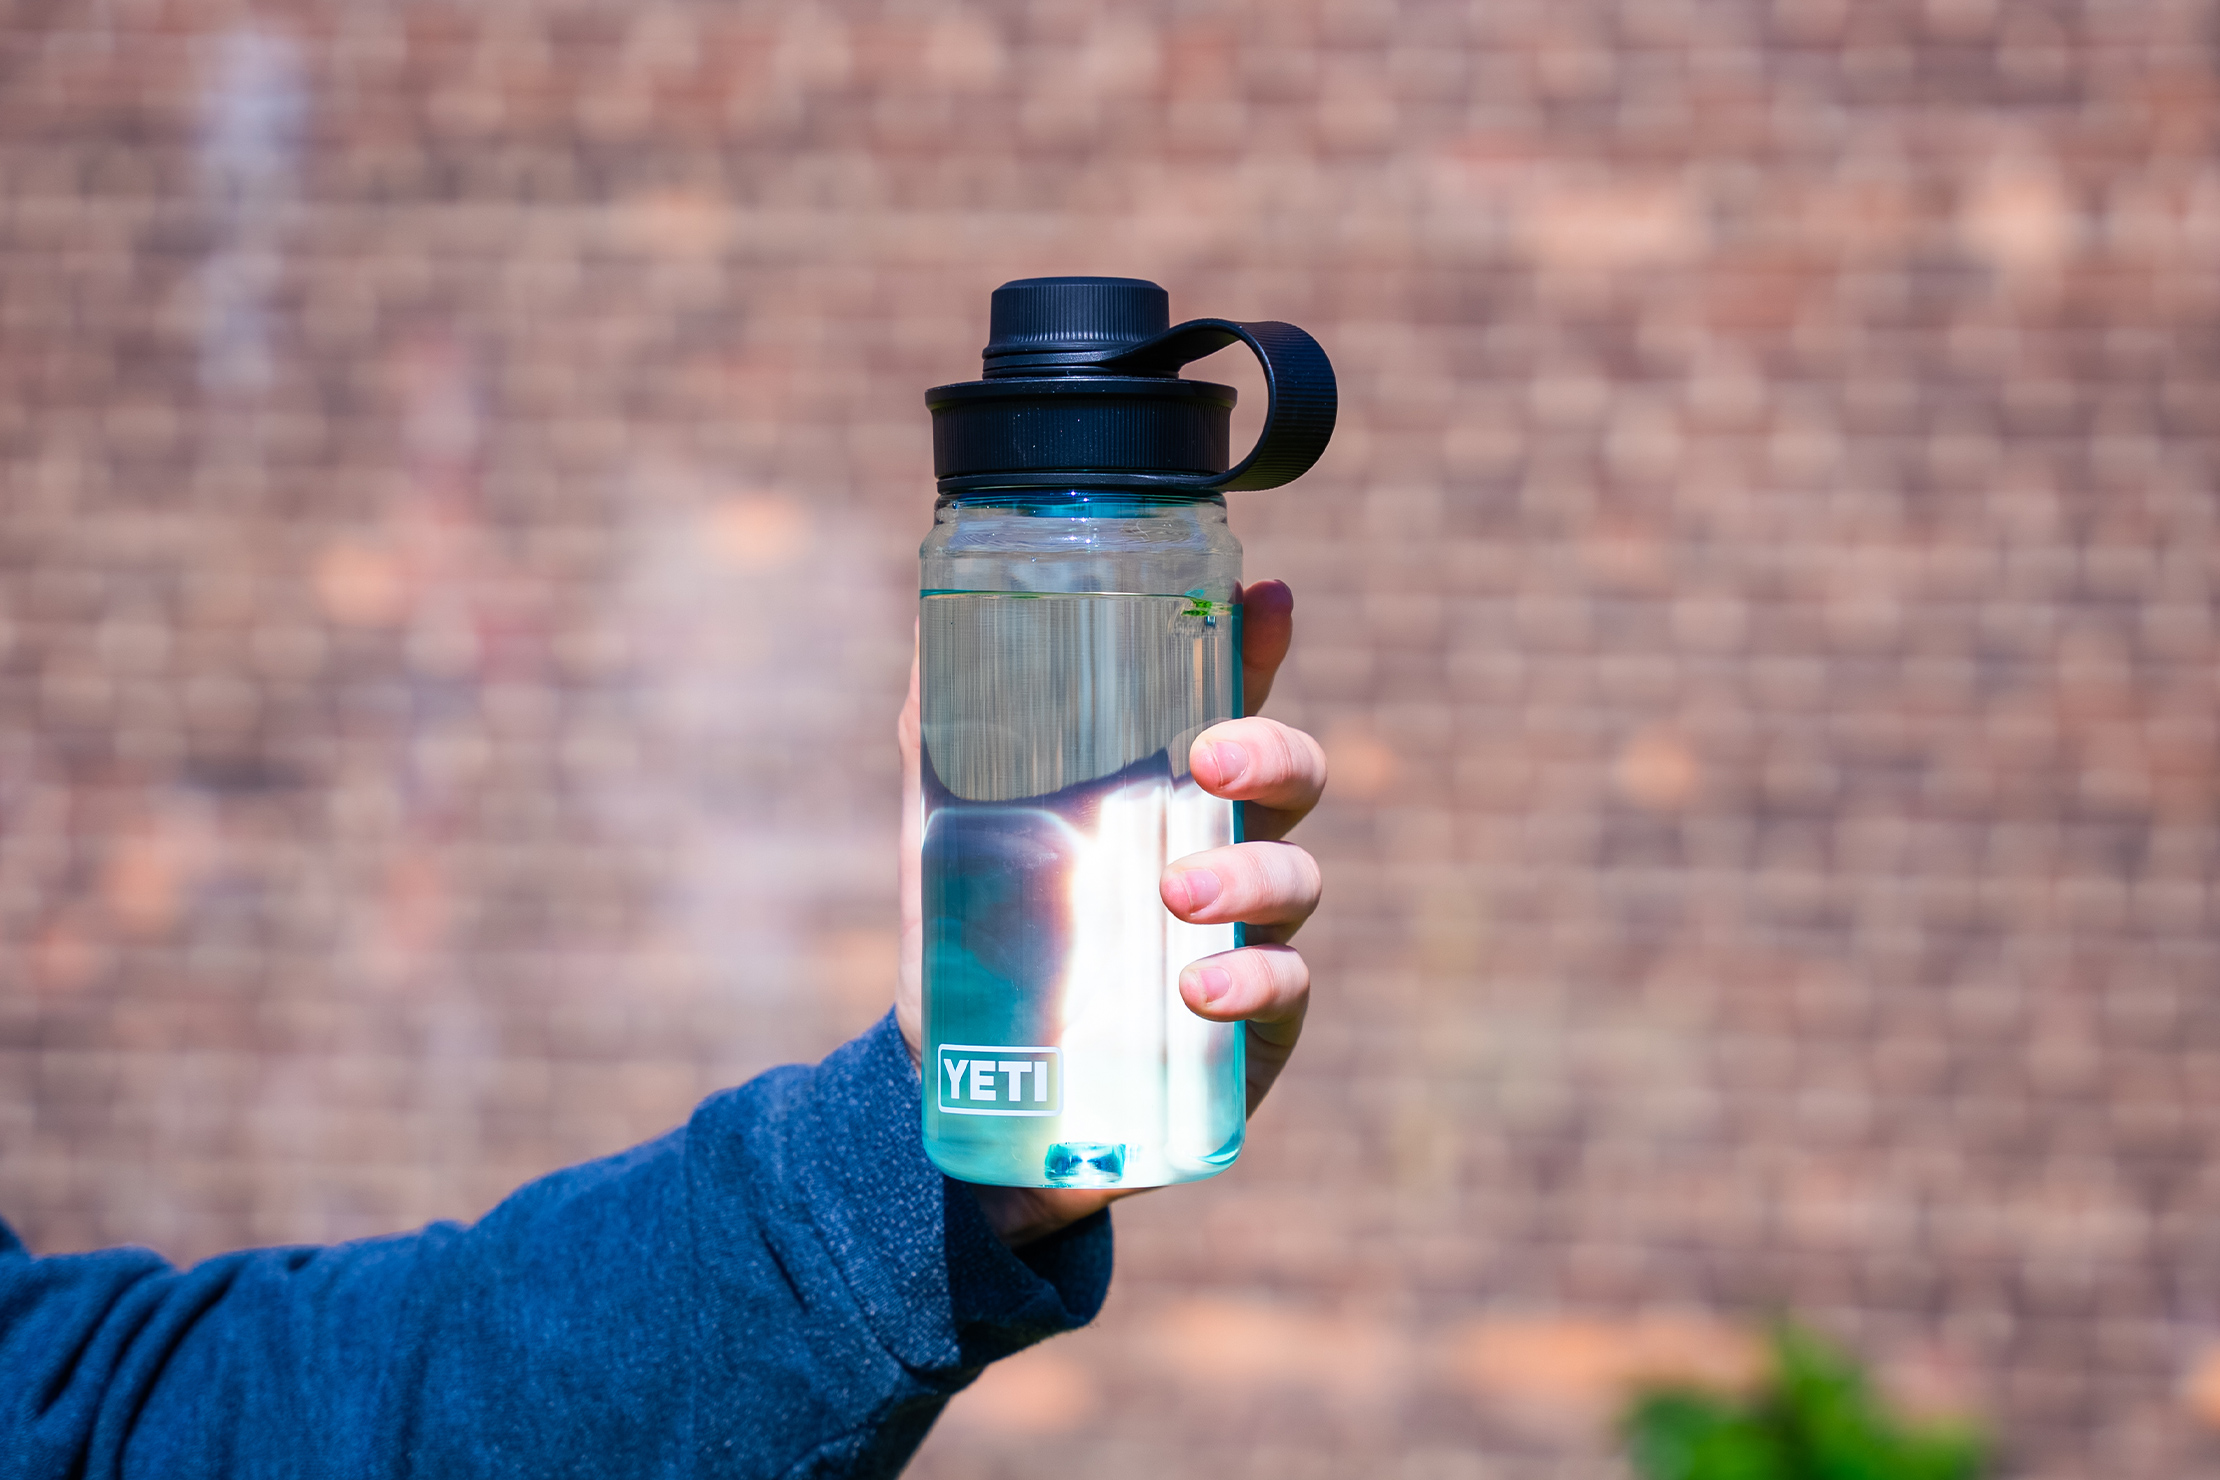 Yeti Yonder Review: The Latest Water Bottle from Yeti